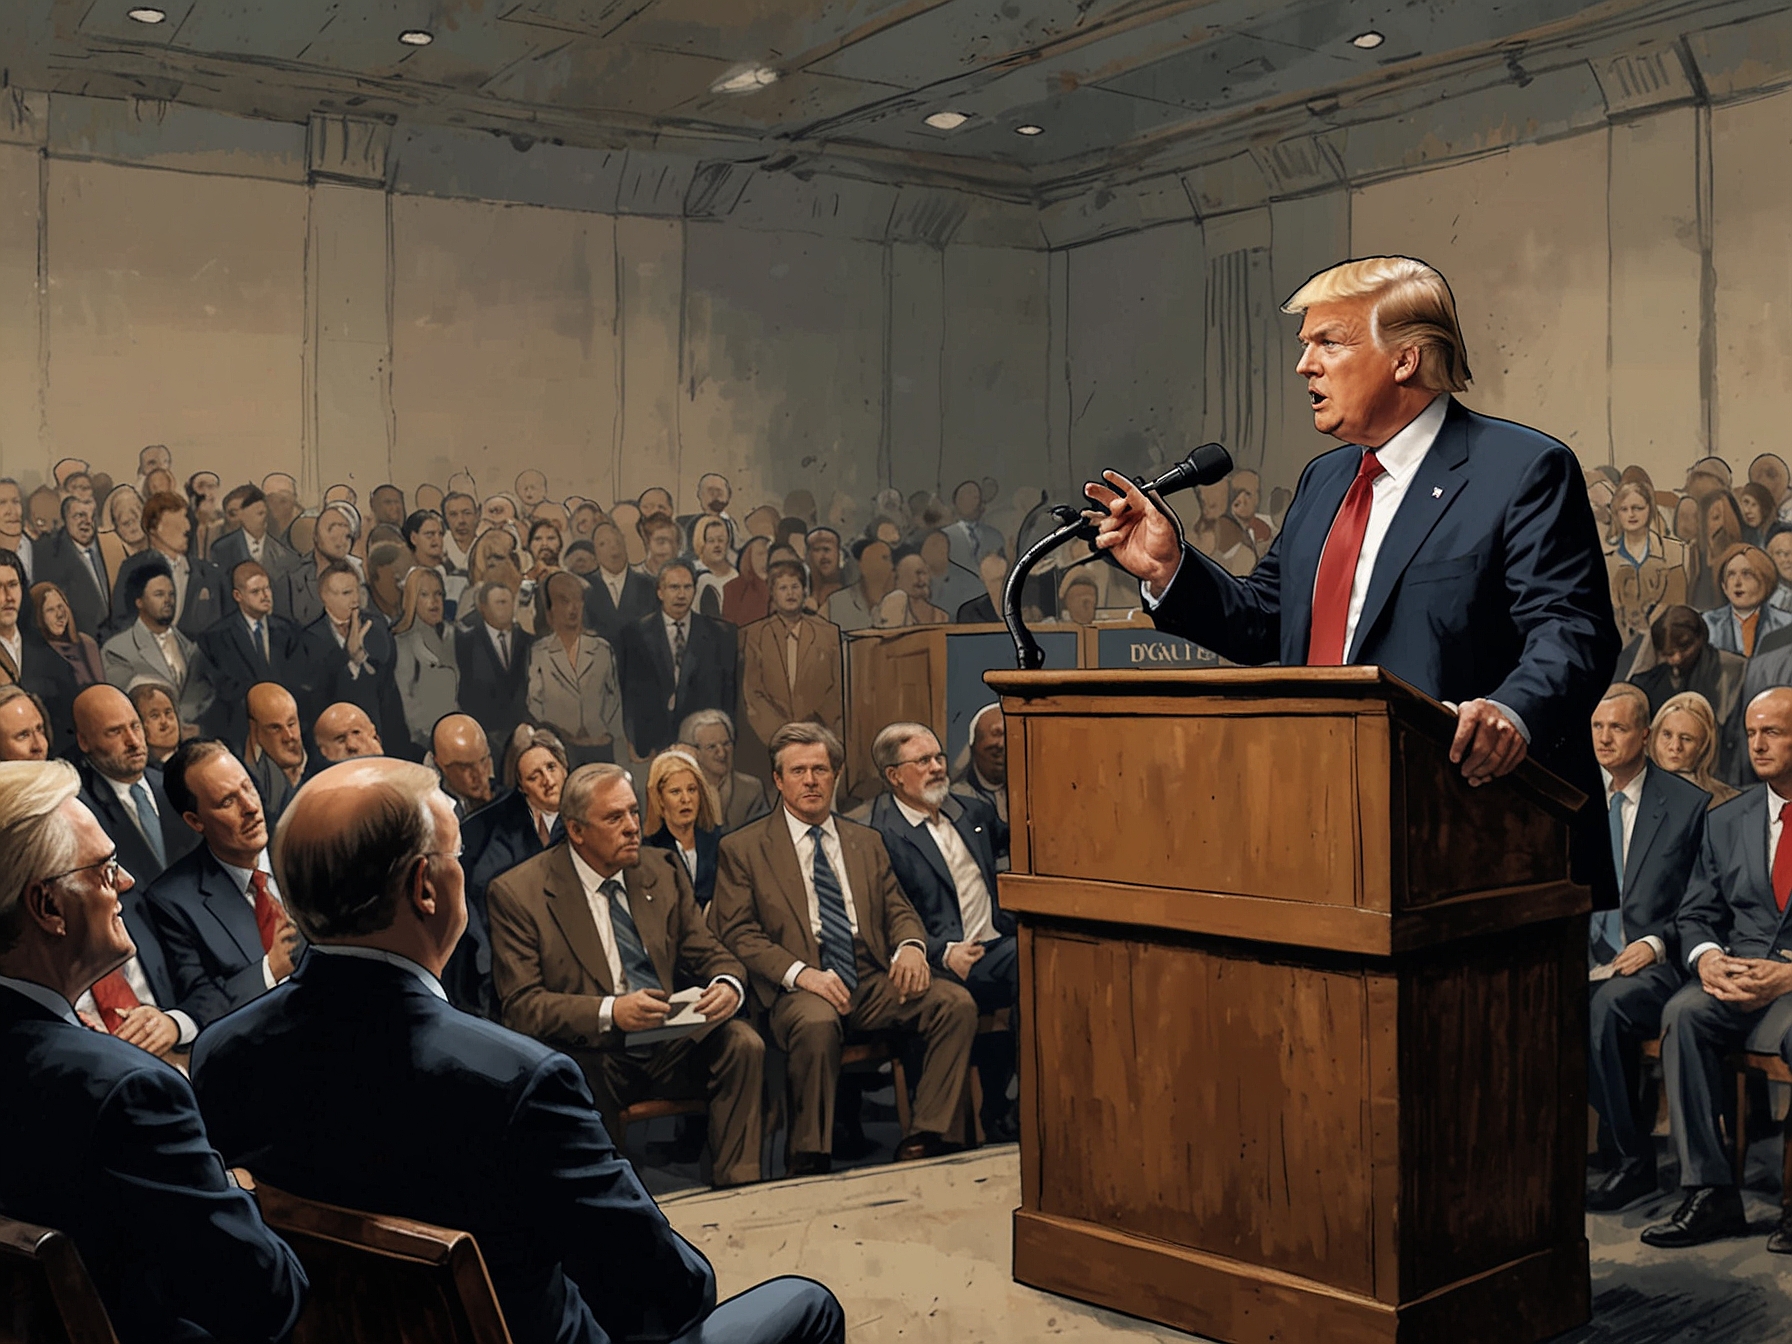 An illustration of Donald Trump speaking at the Faith and Freedom Coalition conference, where he controversially suggested migrants should fight for sport, drawing attention from a mixed audience.